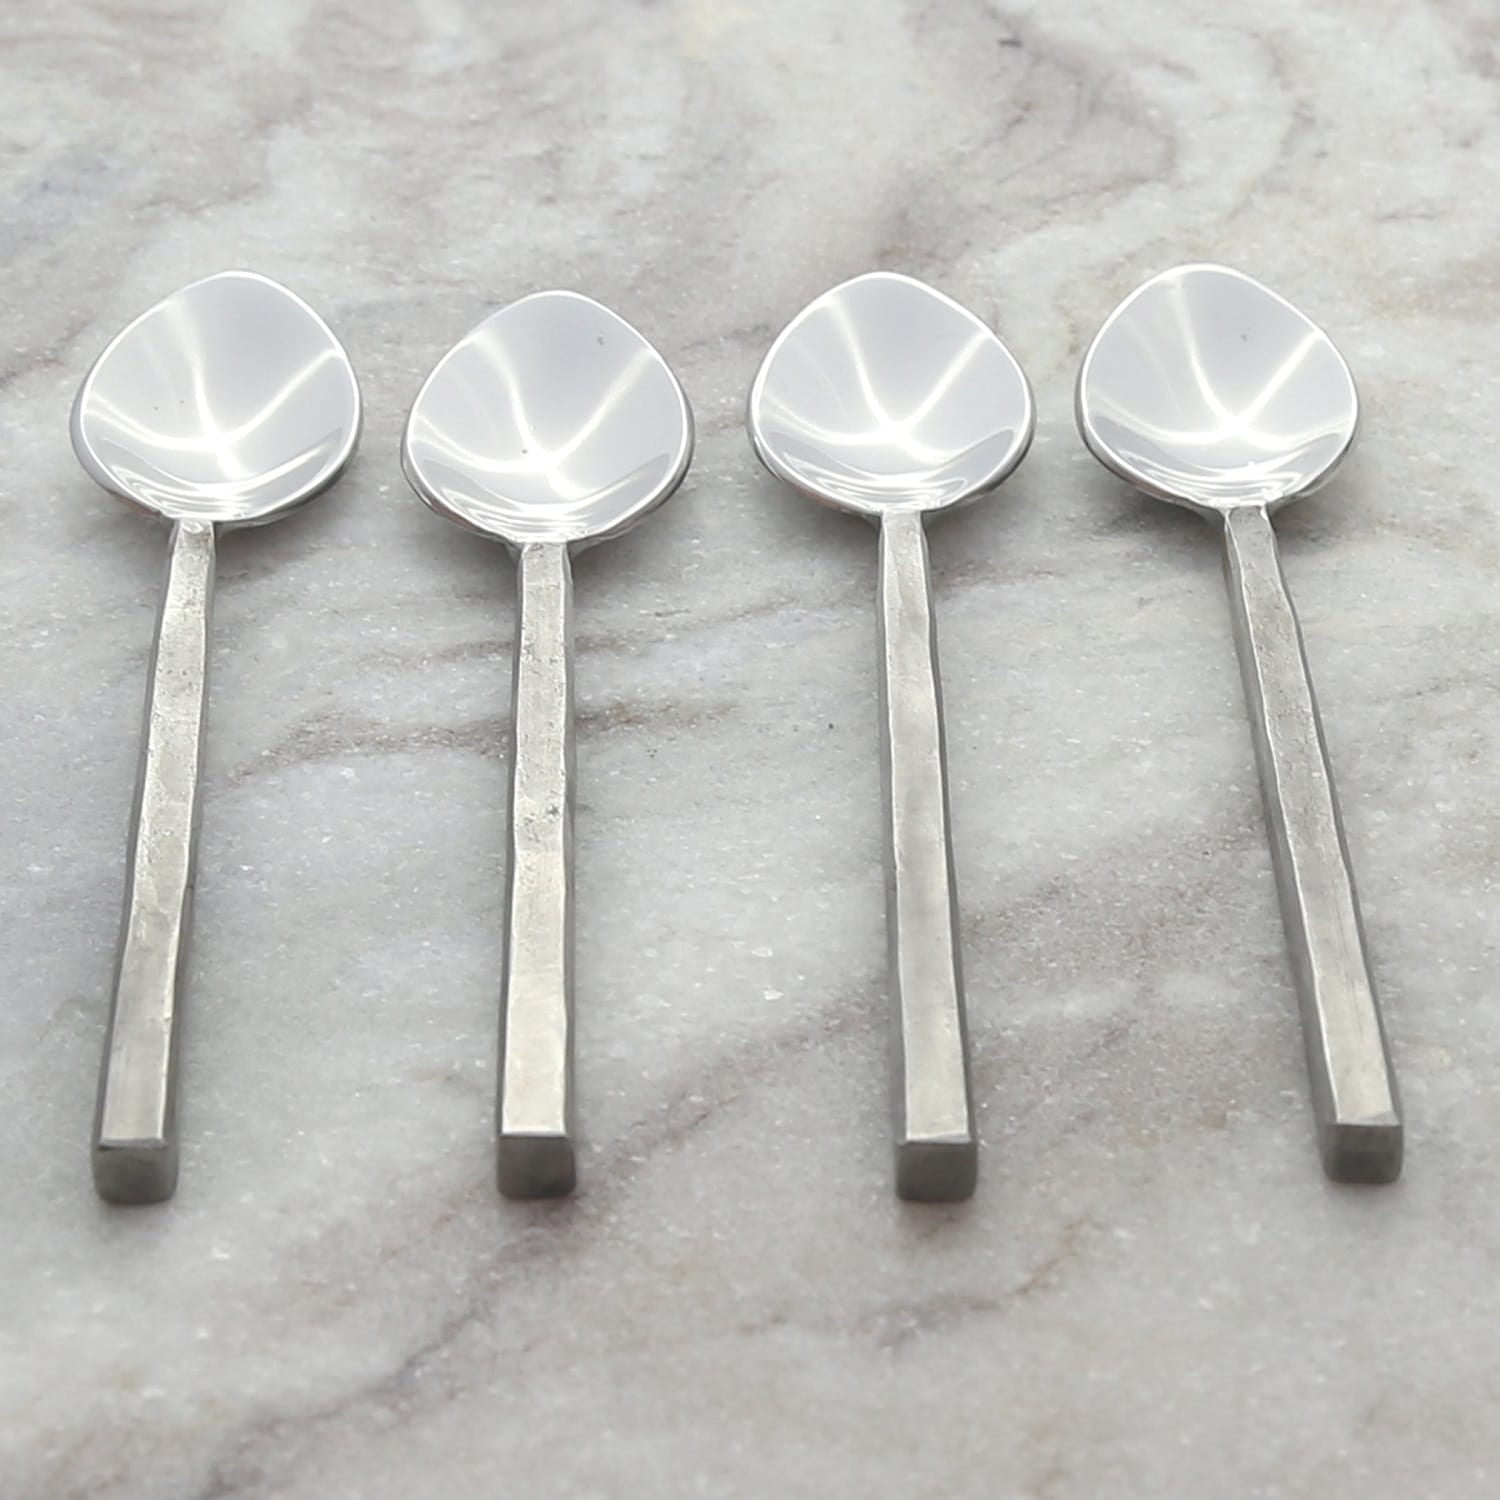 Modern Inox Stainless Set of 6 Tablespoons